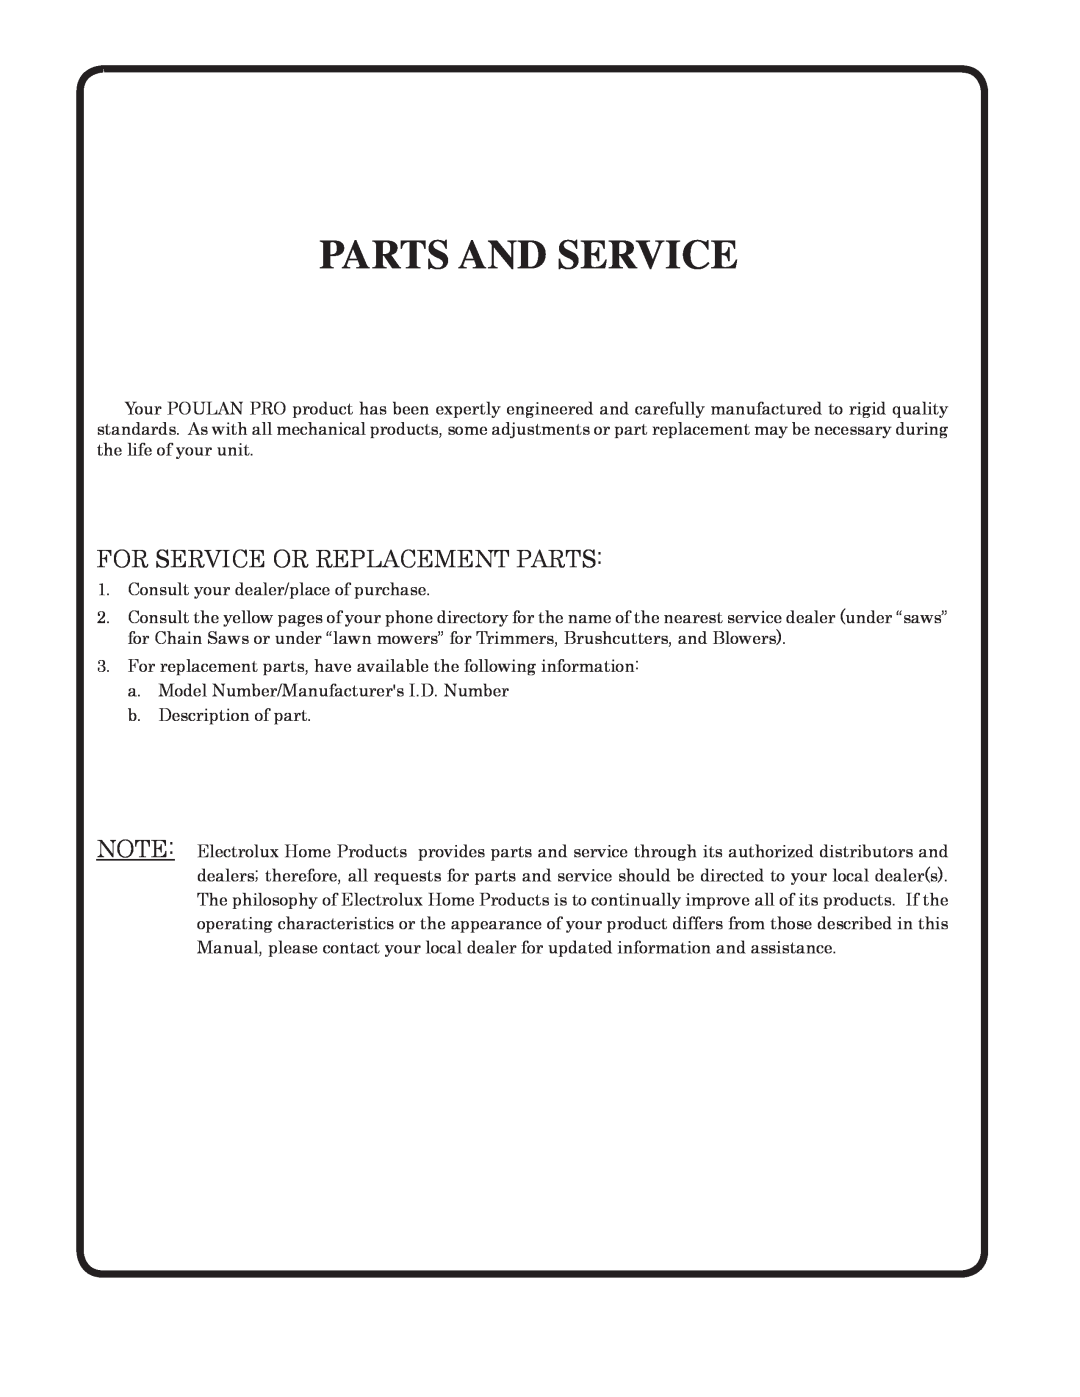 Poulan 190944 owner manual Parts And Service, For Service Or Replacement Parts 